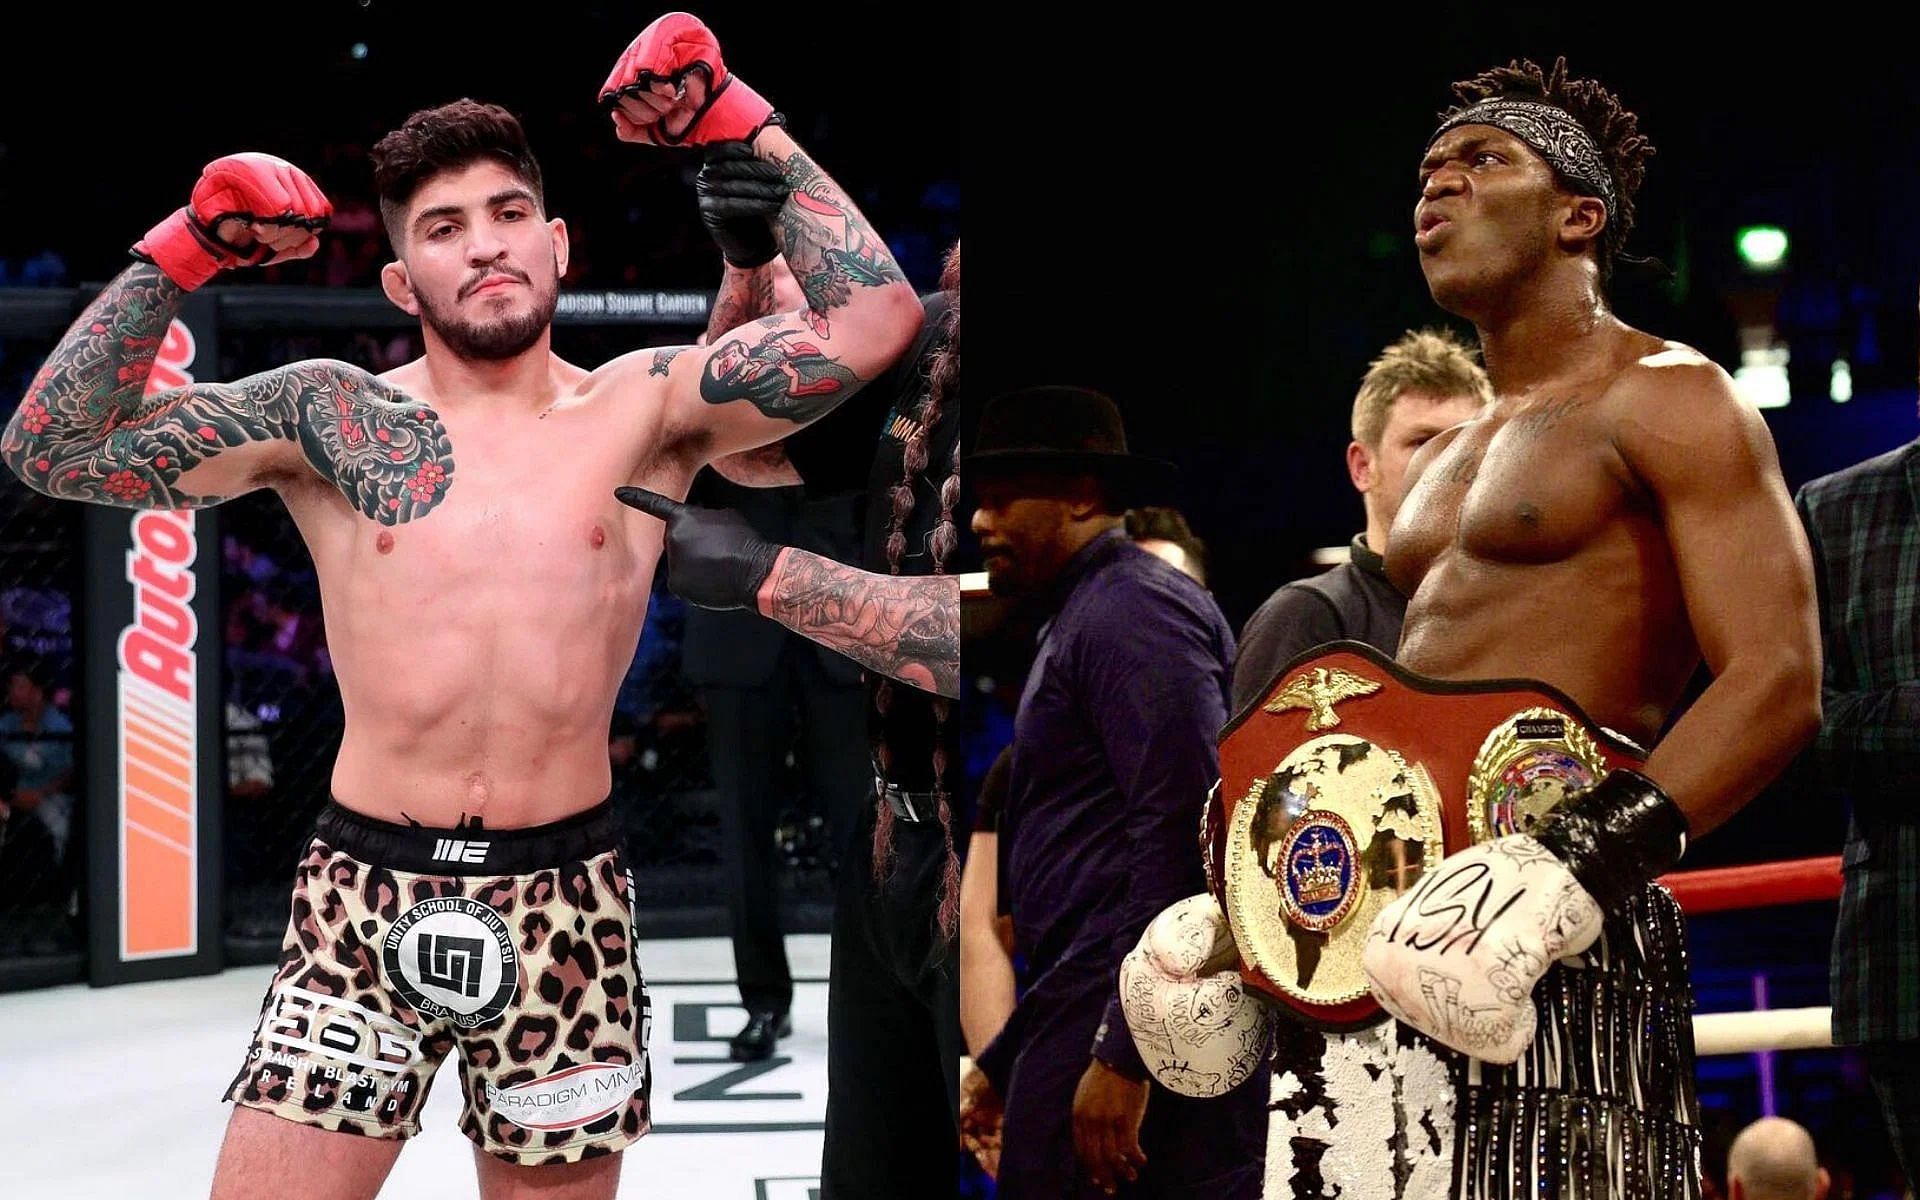 Dillon Danis: MMA Fighter Danis and KSI Face Backlash for Posing With Belts- ‘What Kind of Belts'